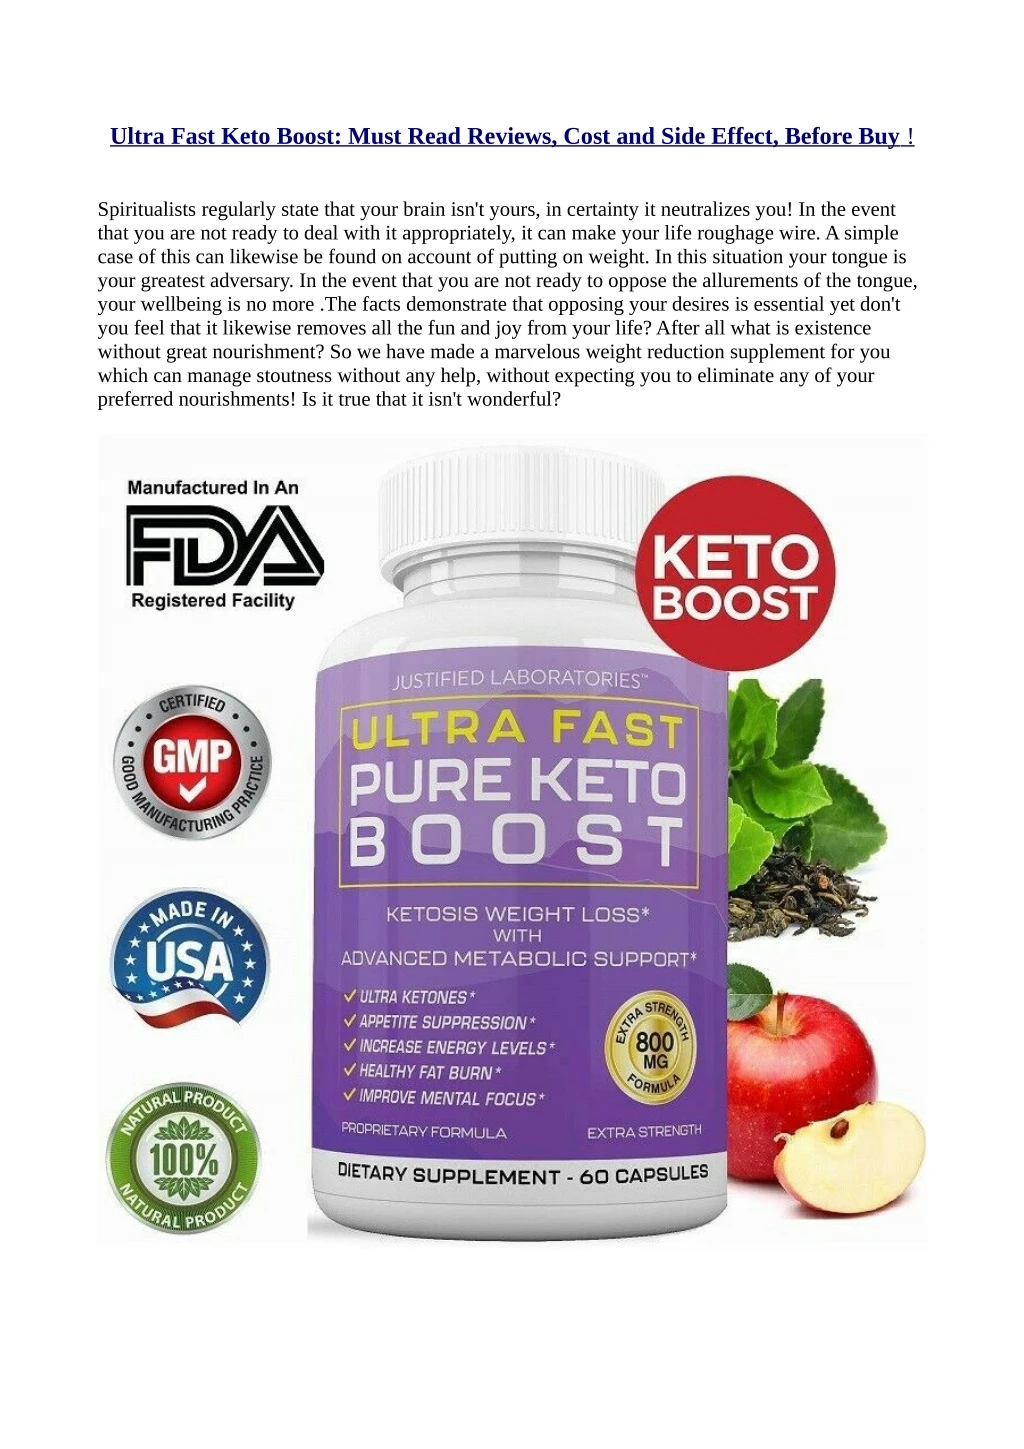 ultra fast keto boost must read reviews cost